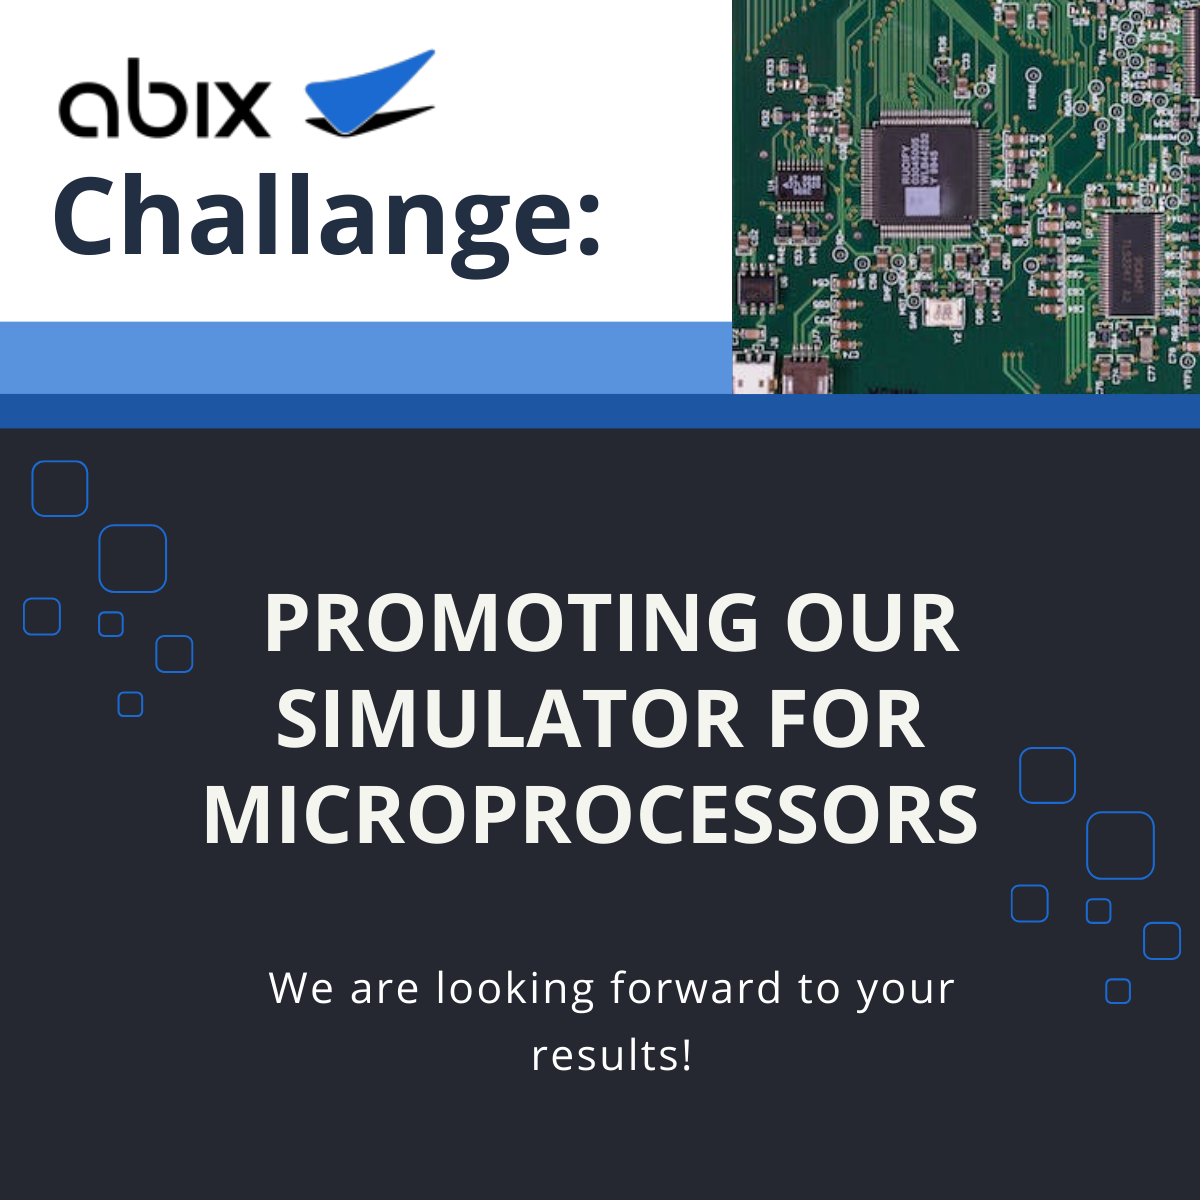 How to promote a simulator for the microprocessor industry?